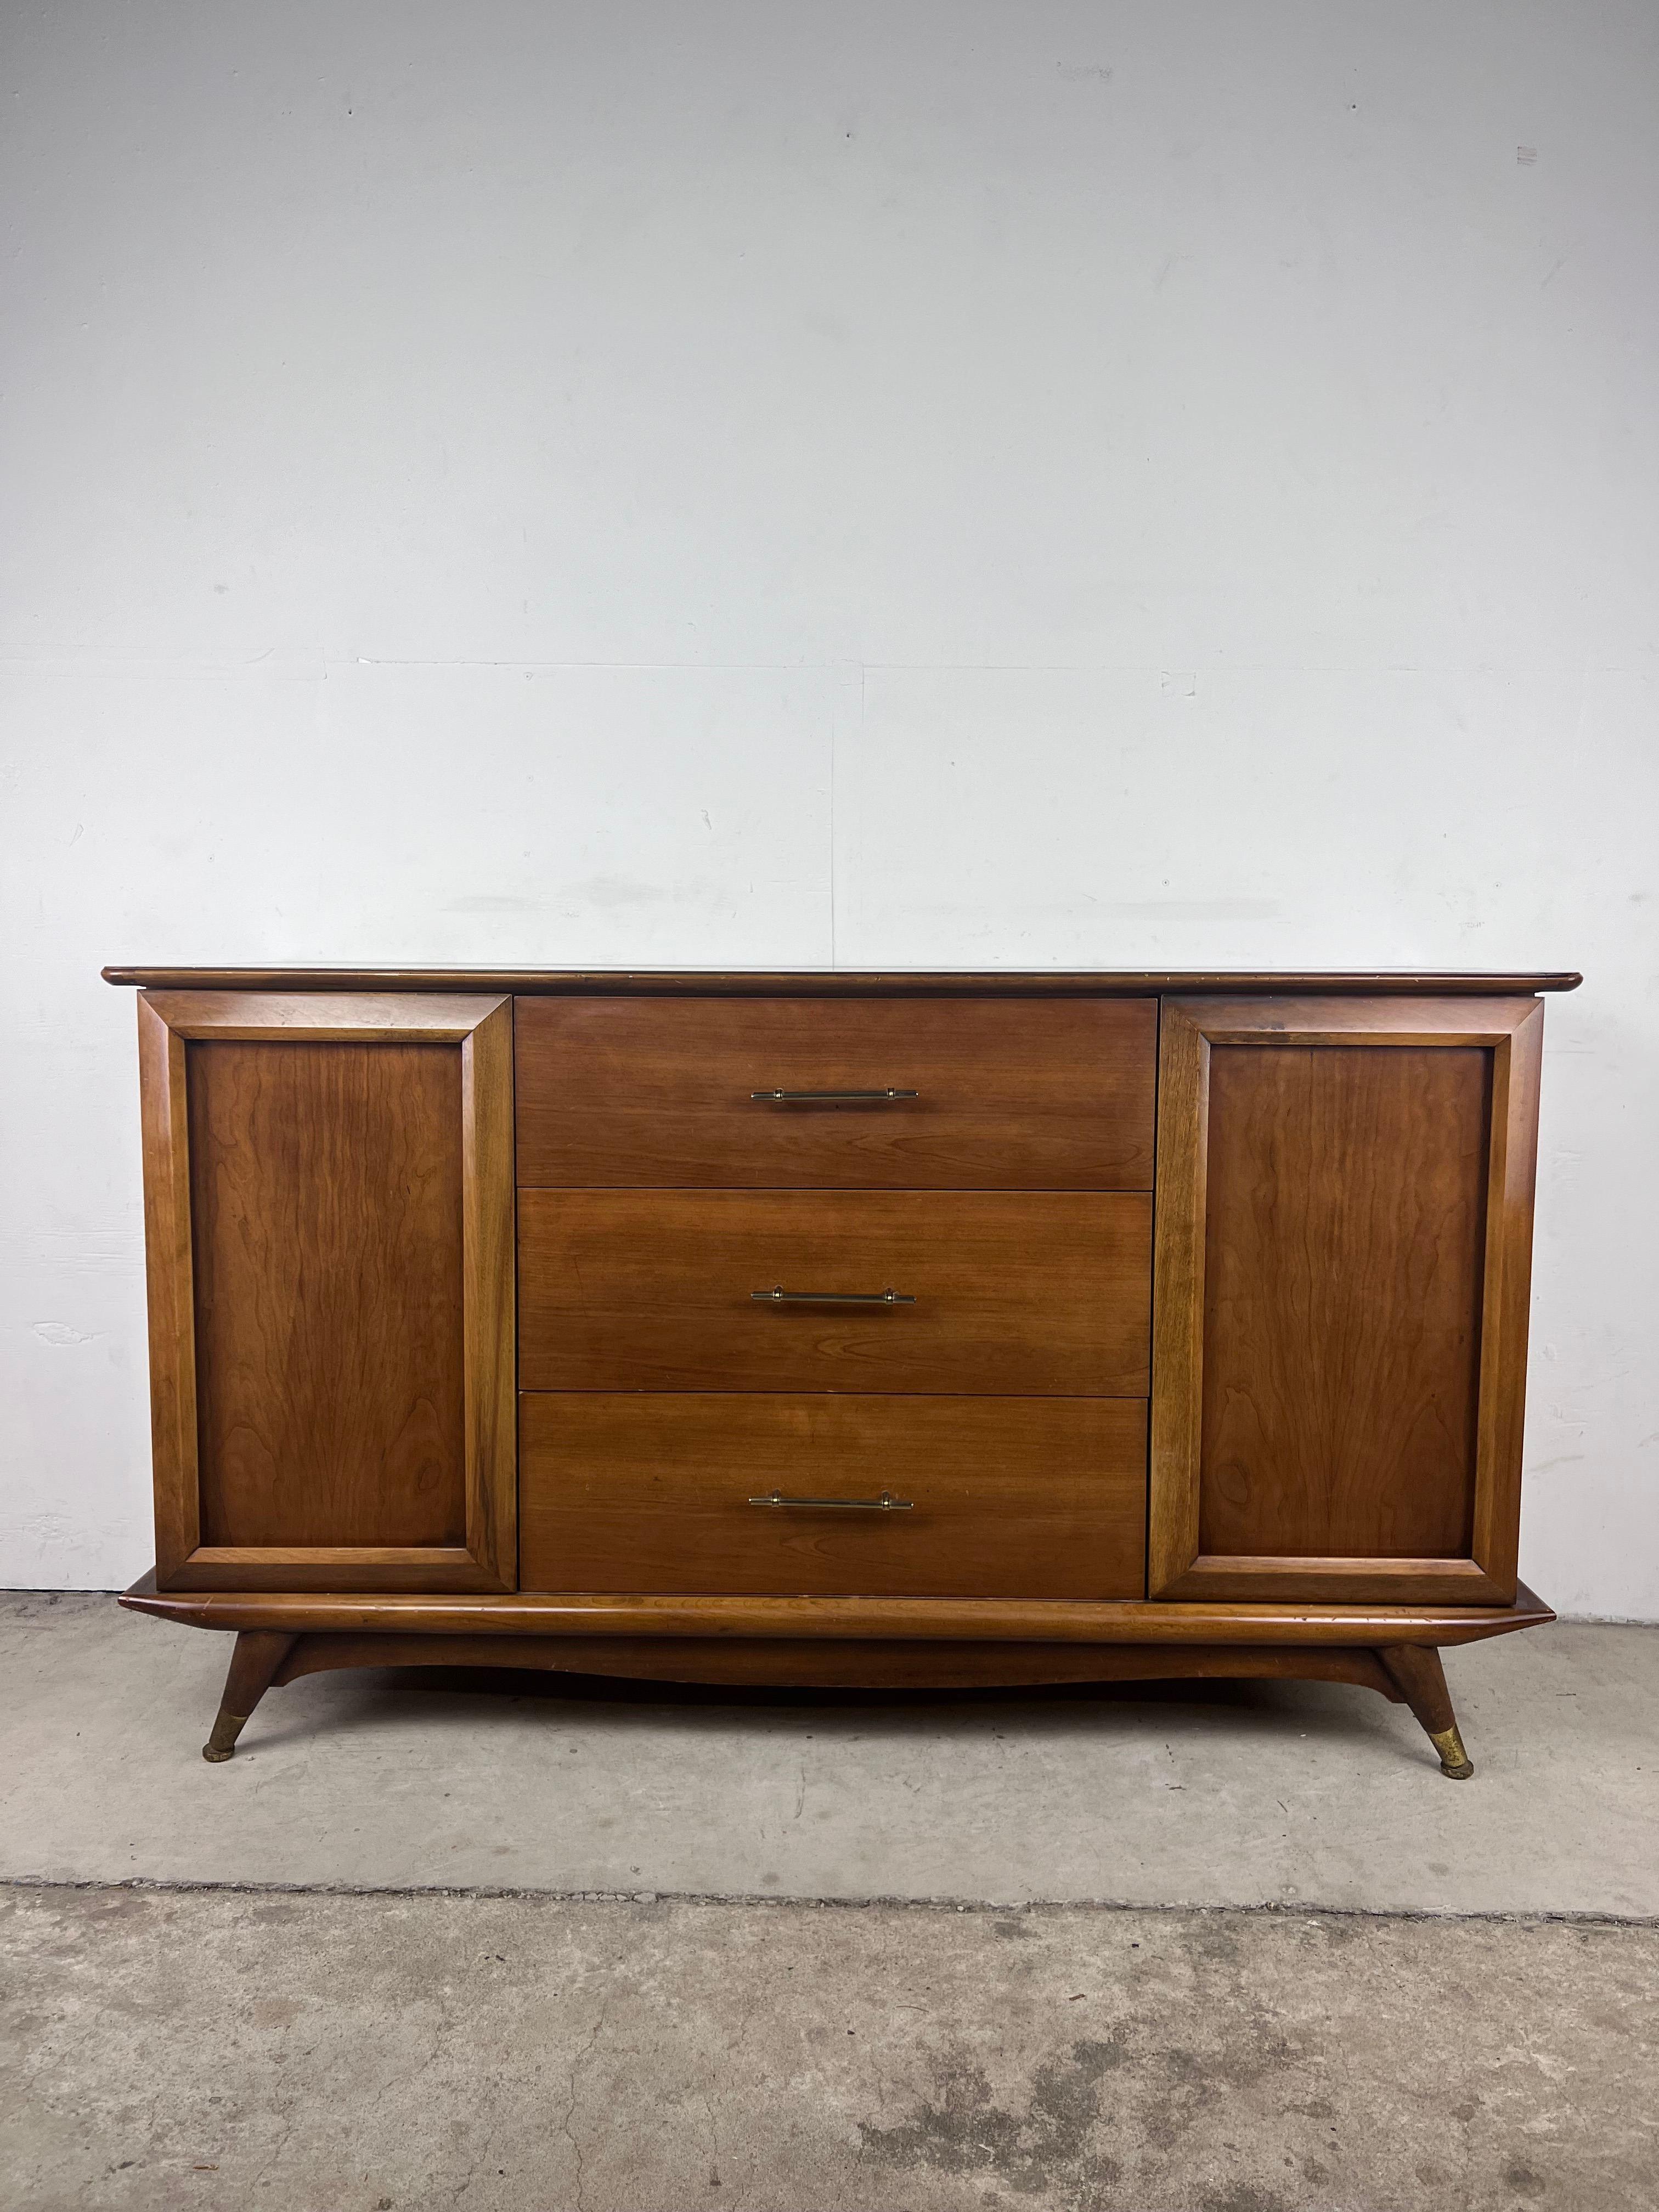 This mid century modern credenza features hardwood construction, walnut veneer with original finish, three dovetailed drawers with brass hardware, two cabinet doors with interior shelving, and brass capped tapered legs.